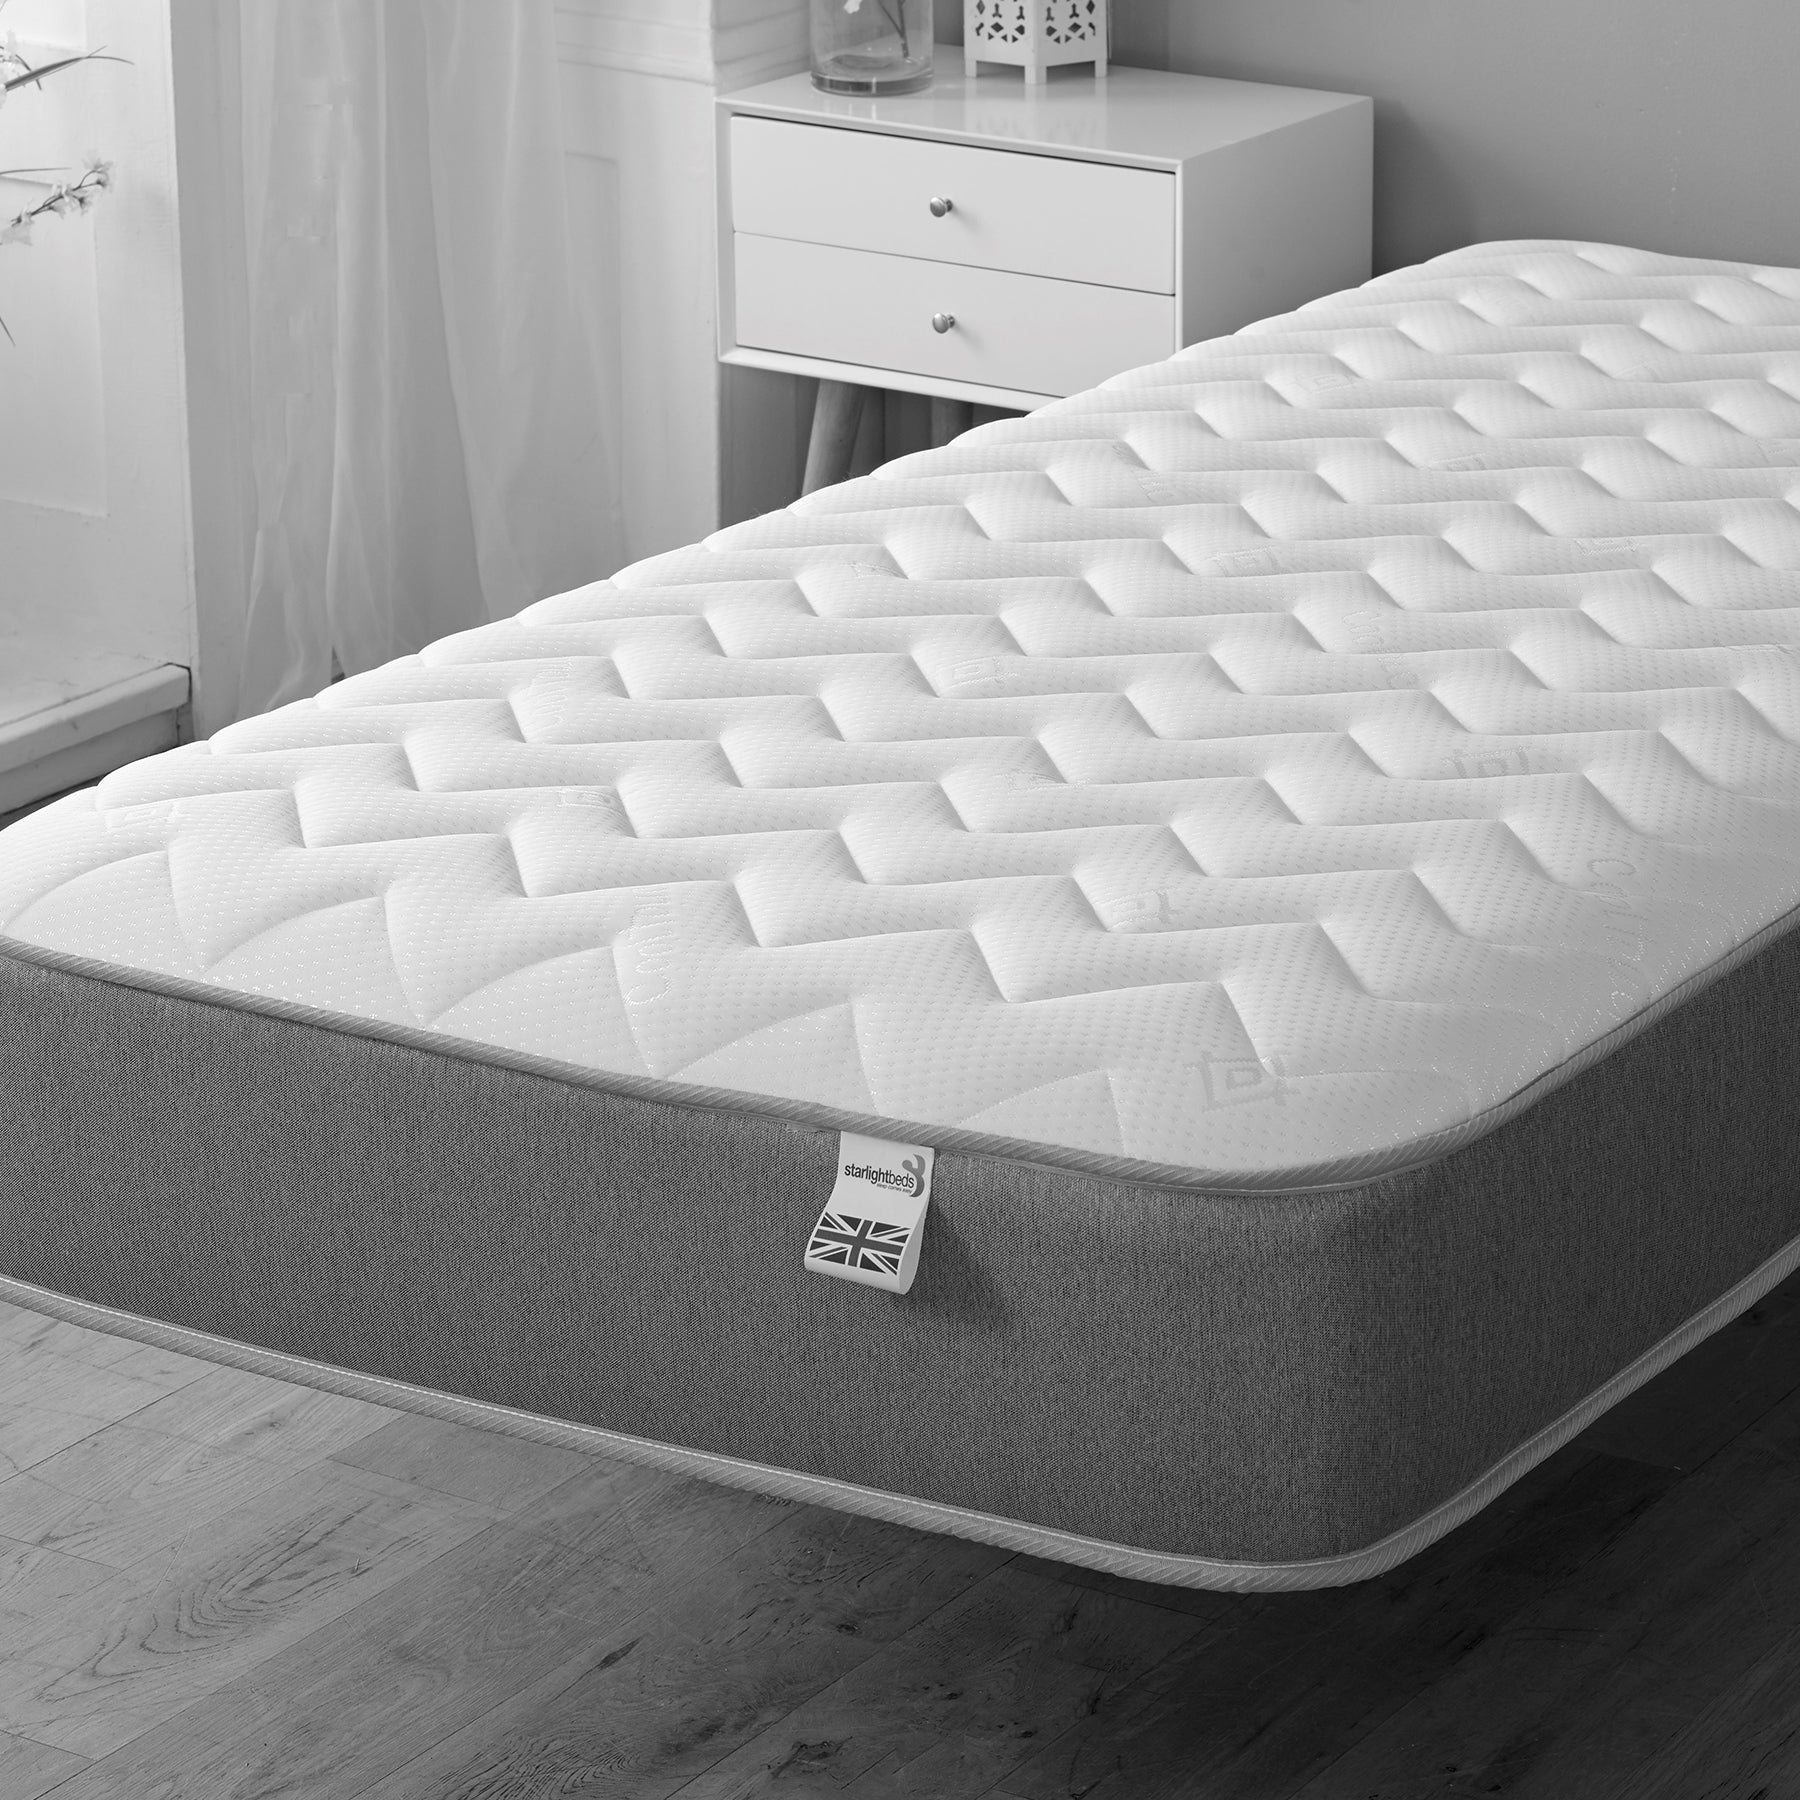 Starlight Beds Grey Zig-Zag Affordable Hybrid Memory foam with Open-coil Spring Mattress